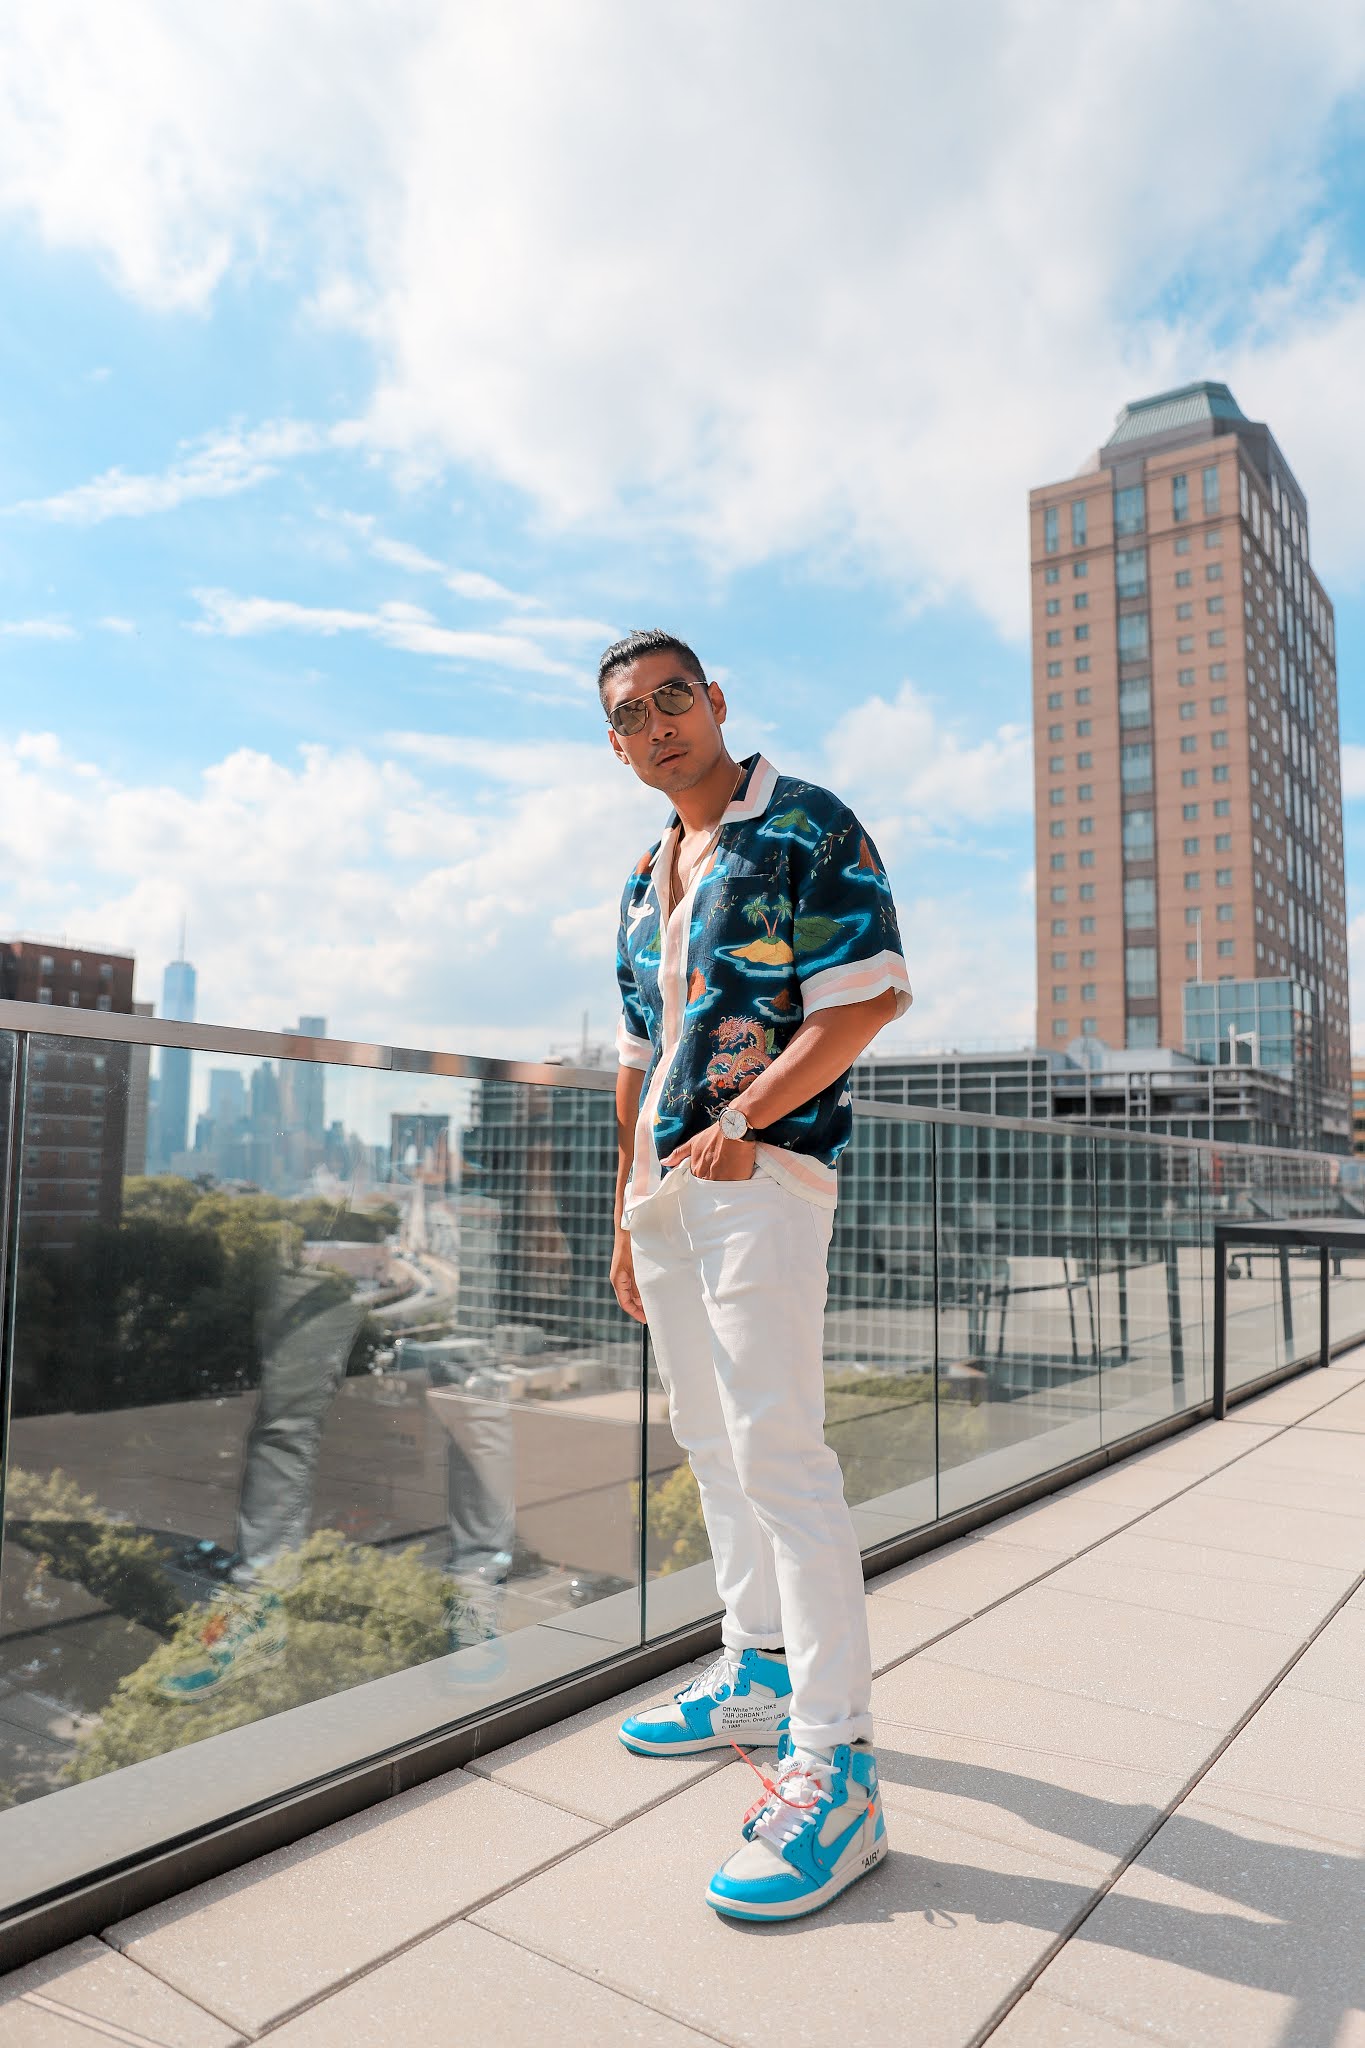 How To: Style a Patterned Shirt | Men's Summer Fashion — LEVITATE STYLE